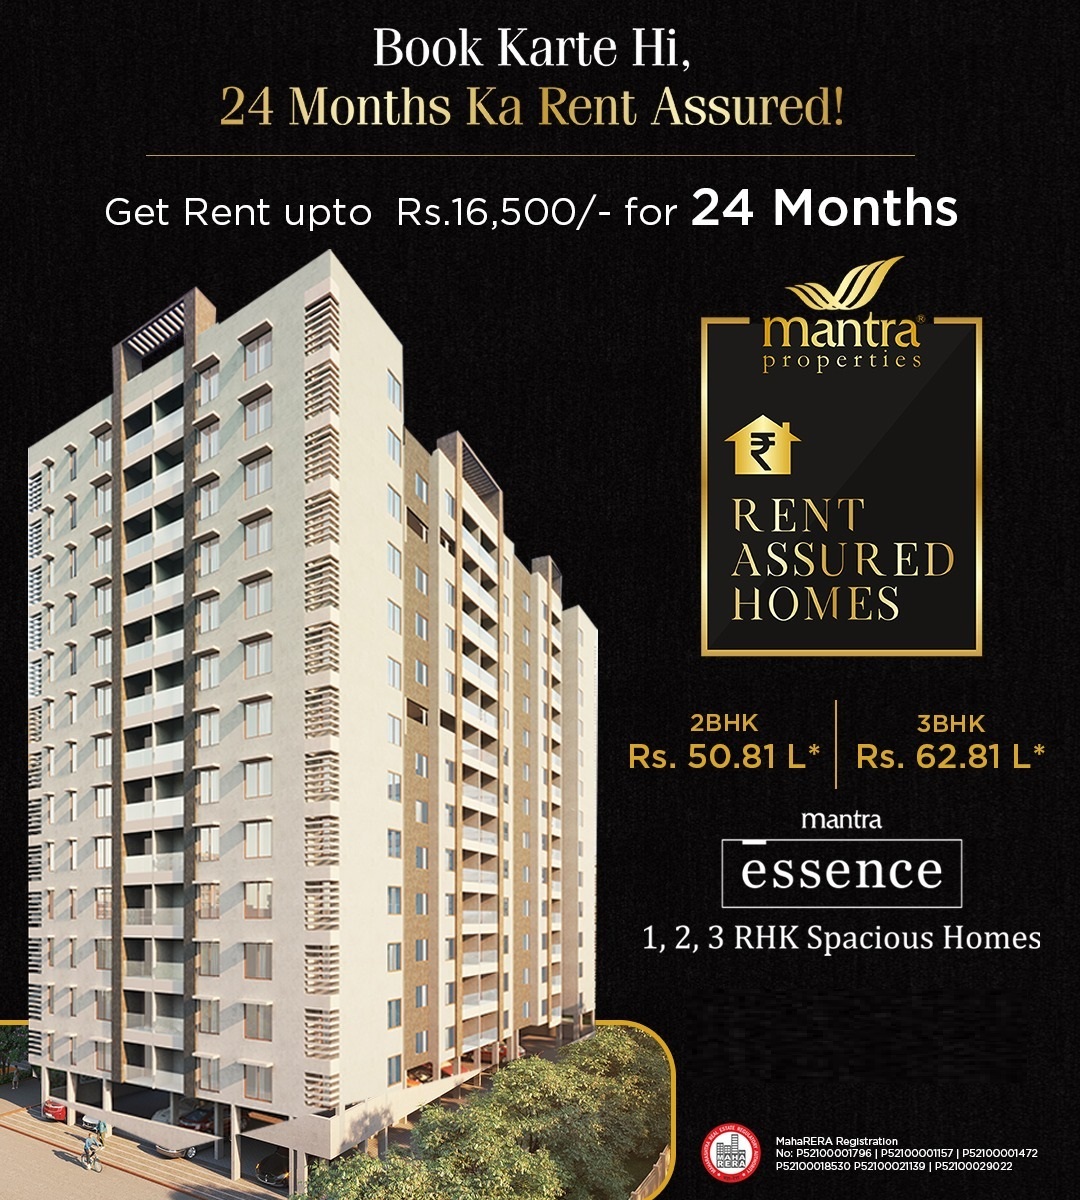 Book 1, 2, 3 BHK spacious homes at Mantra Essence in Undri, Pune Update